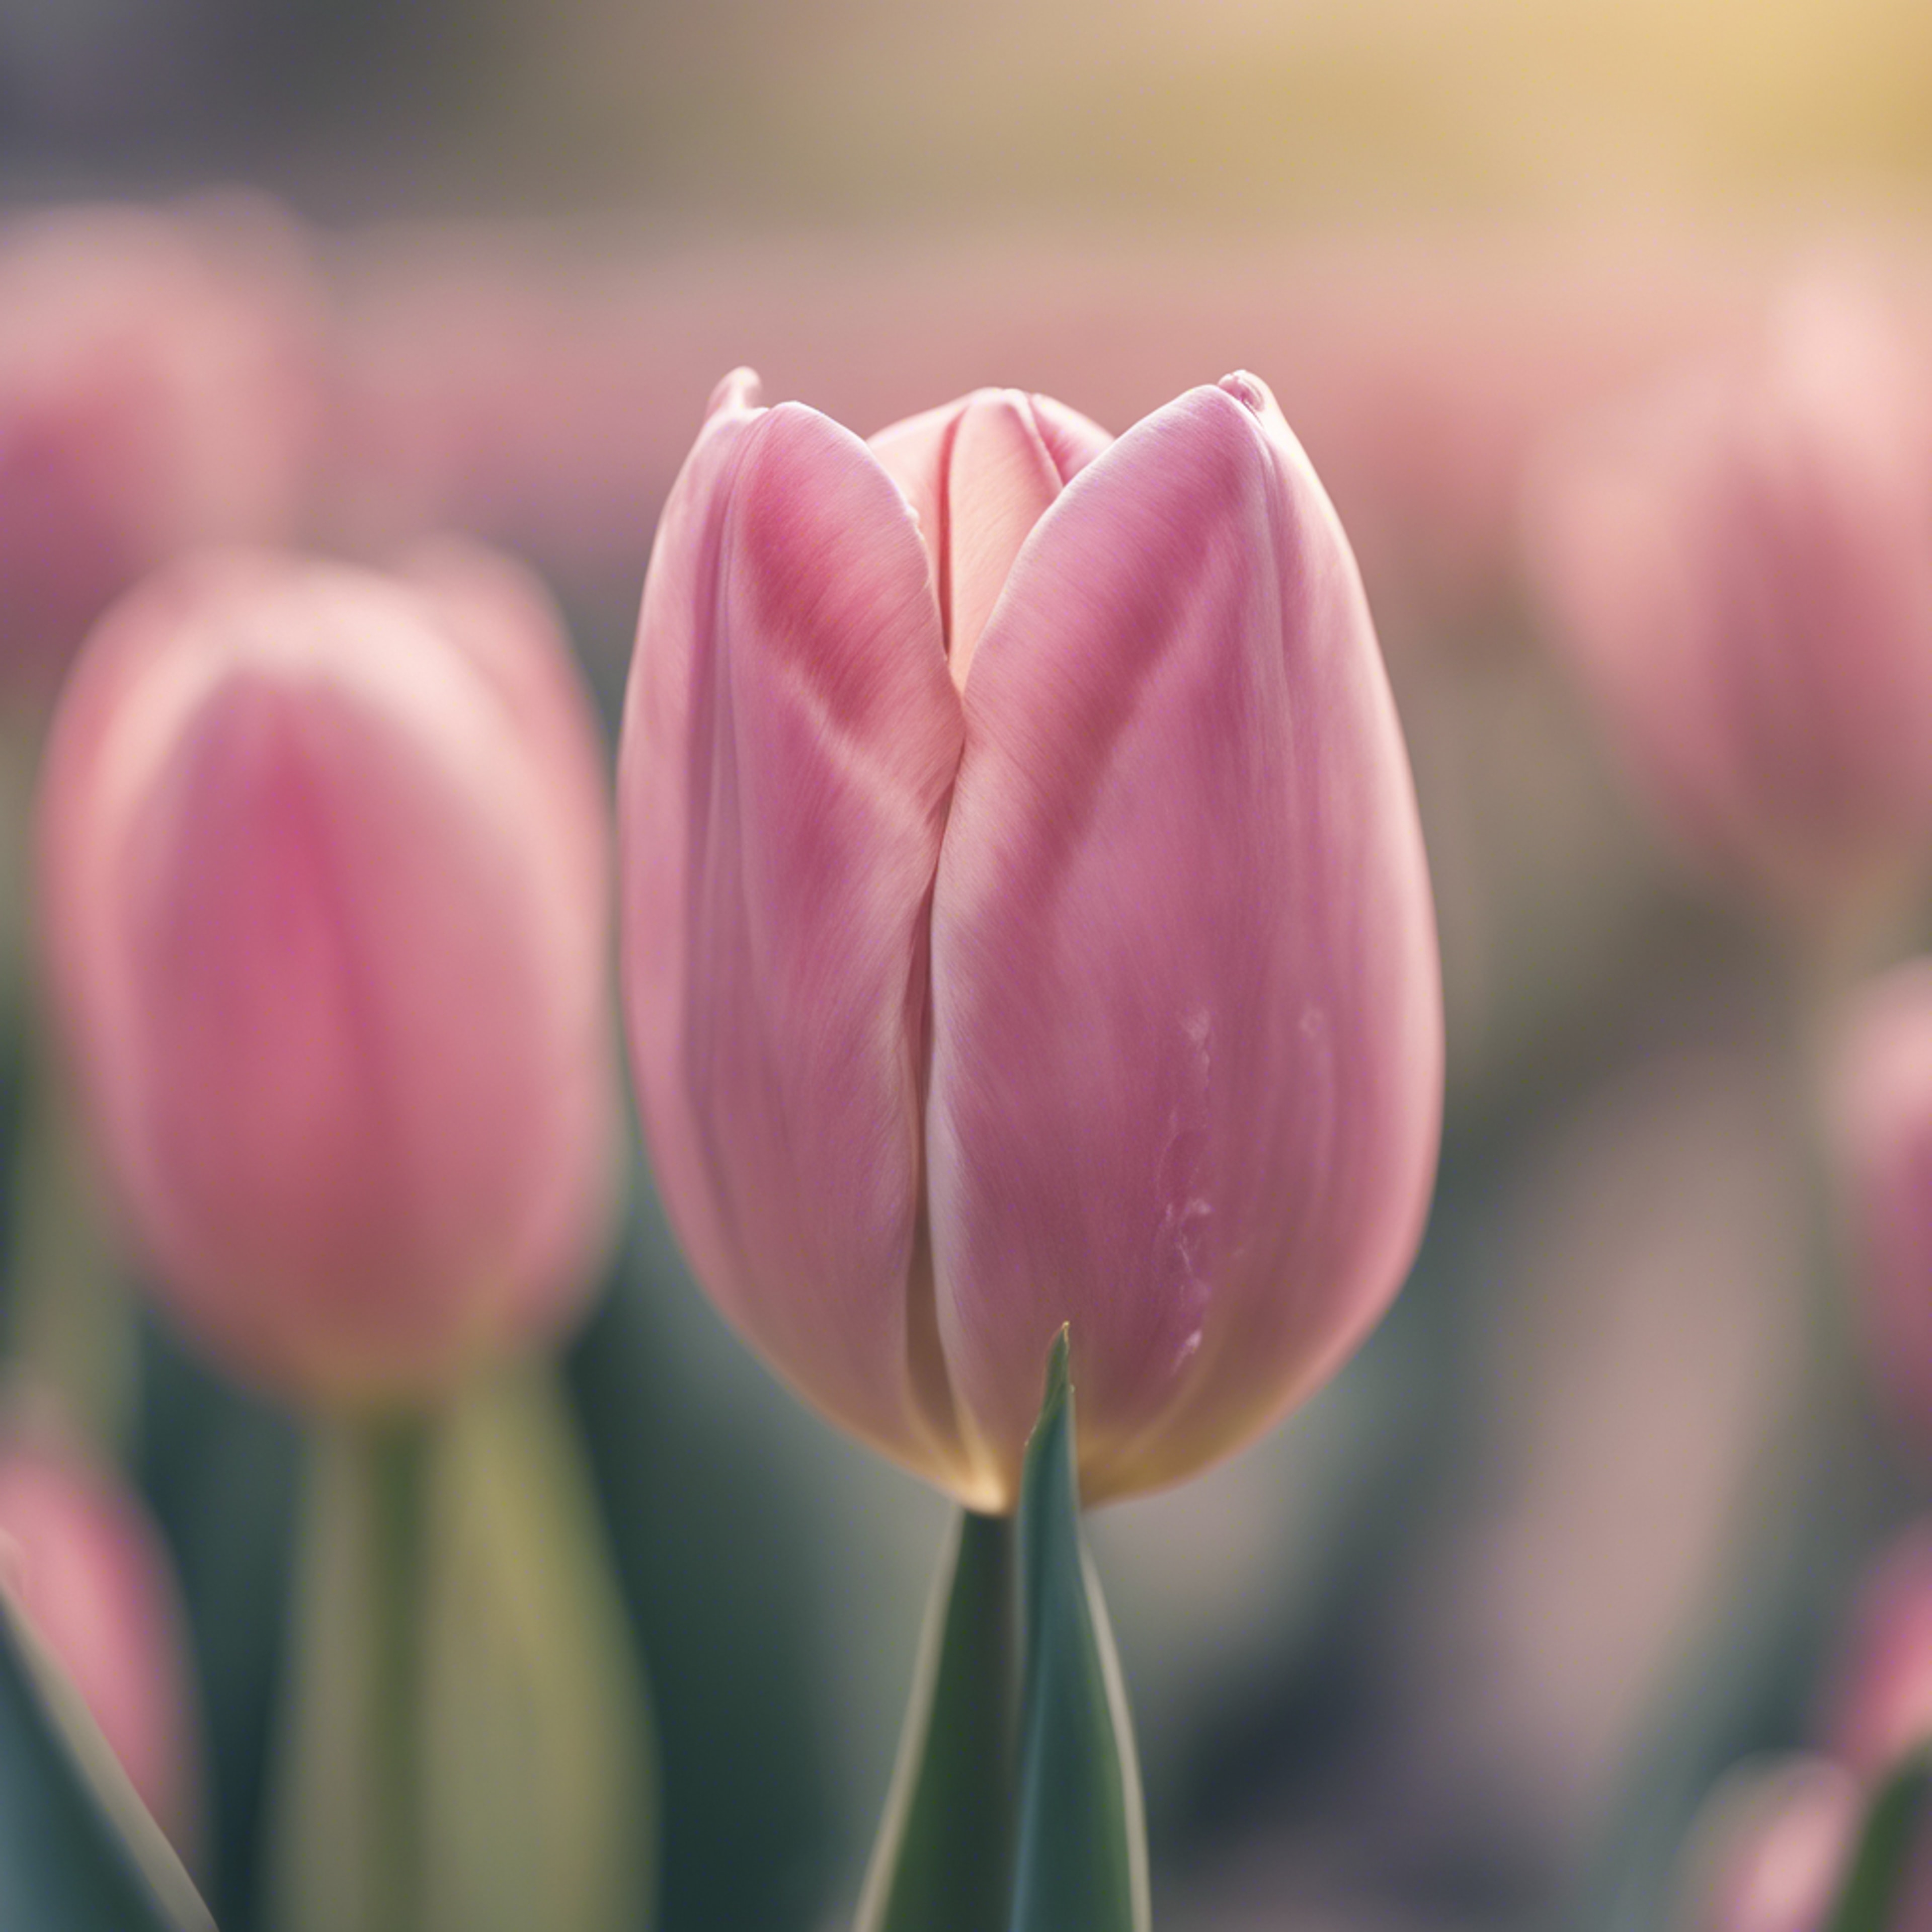 A close-up of a lone pink tulip against a soft and blurry pastel background Tapeta[4132f8cb968043e28bd5]